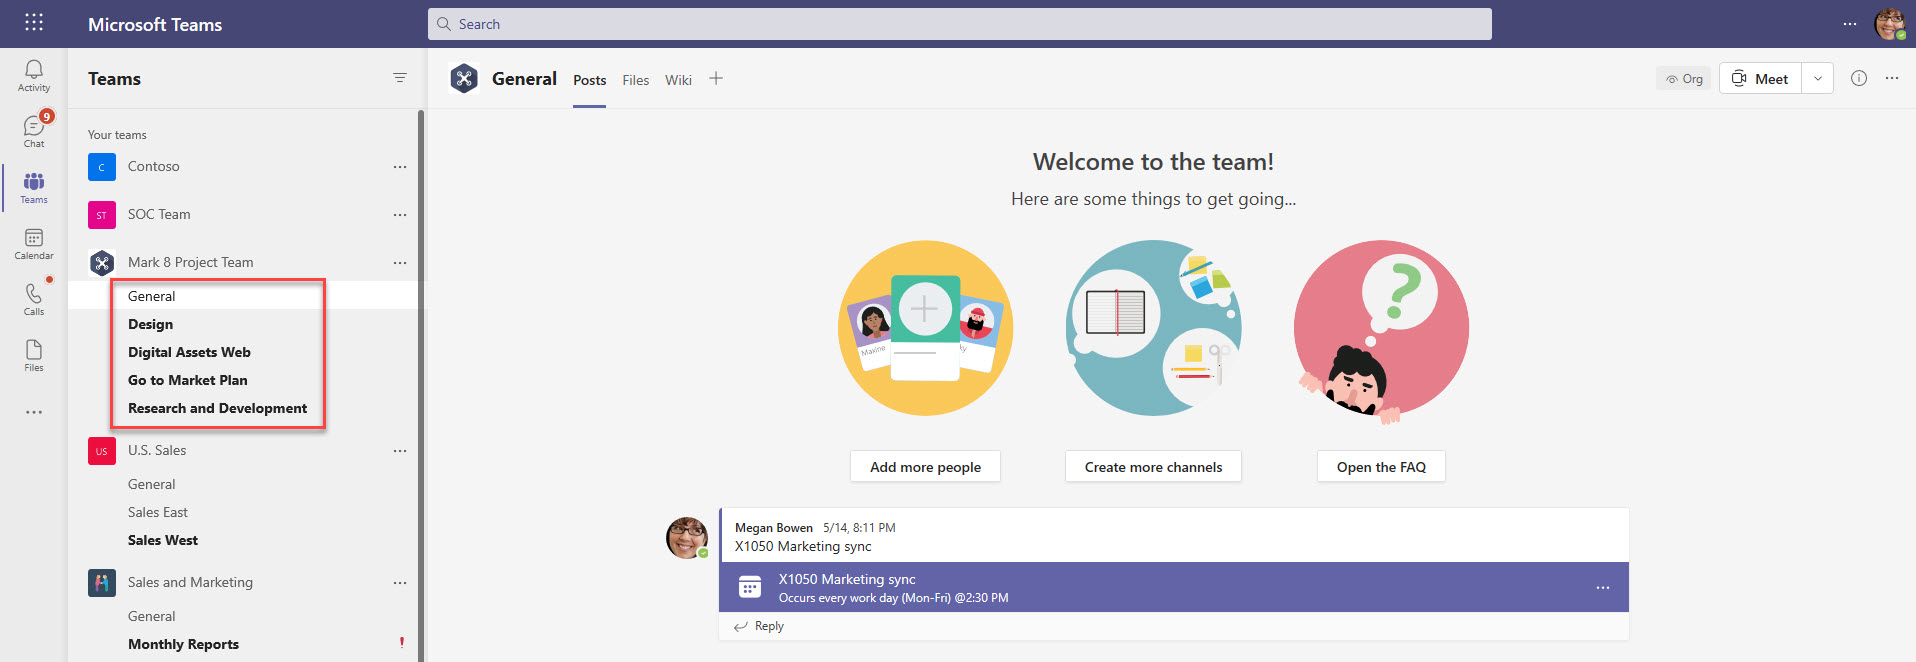 How to use Microsoft Teams and create channels in Tea